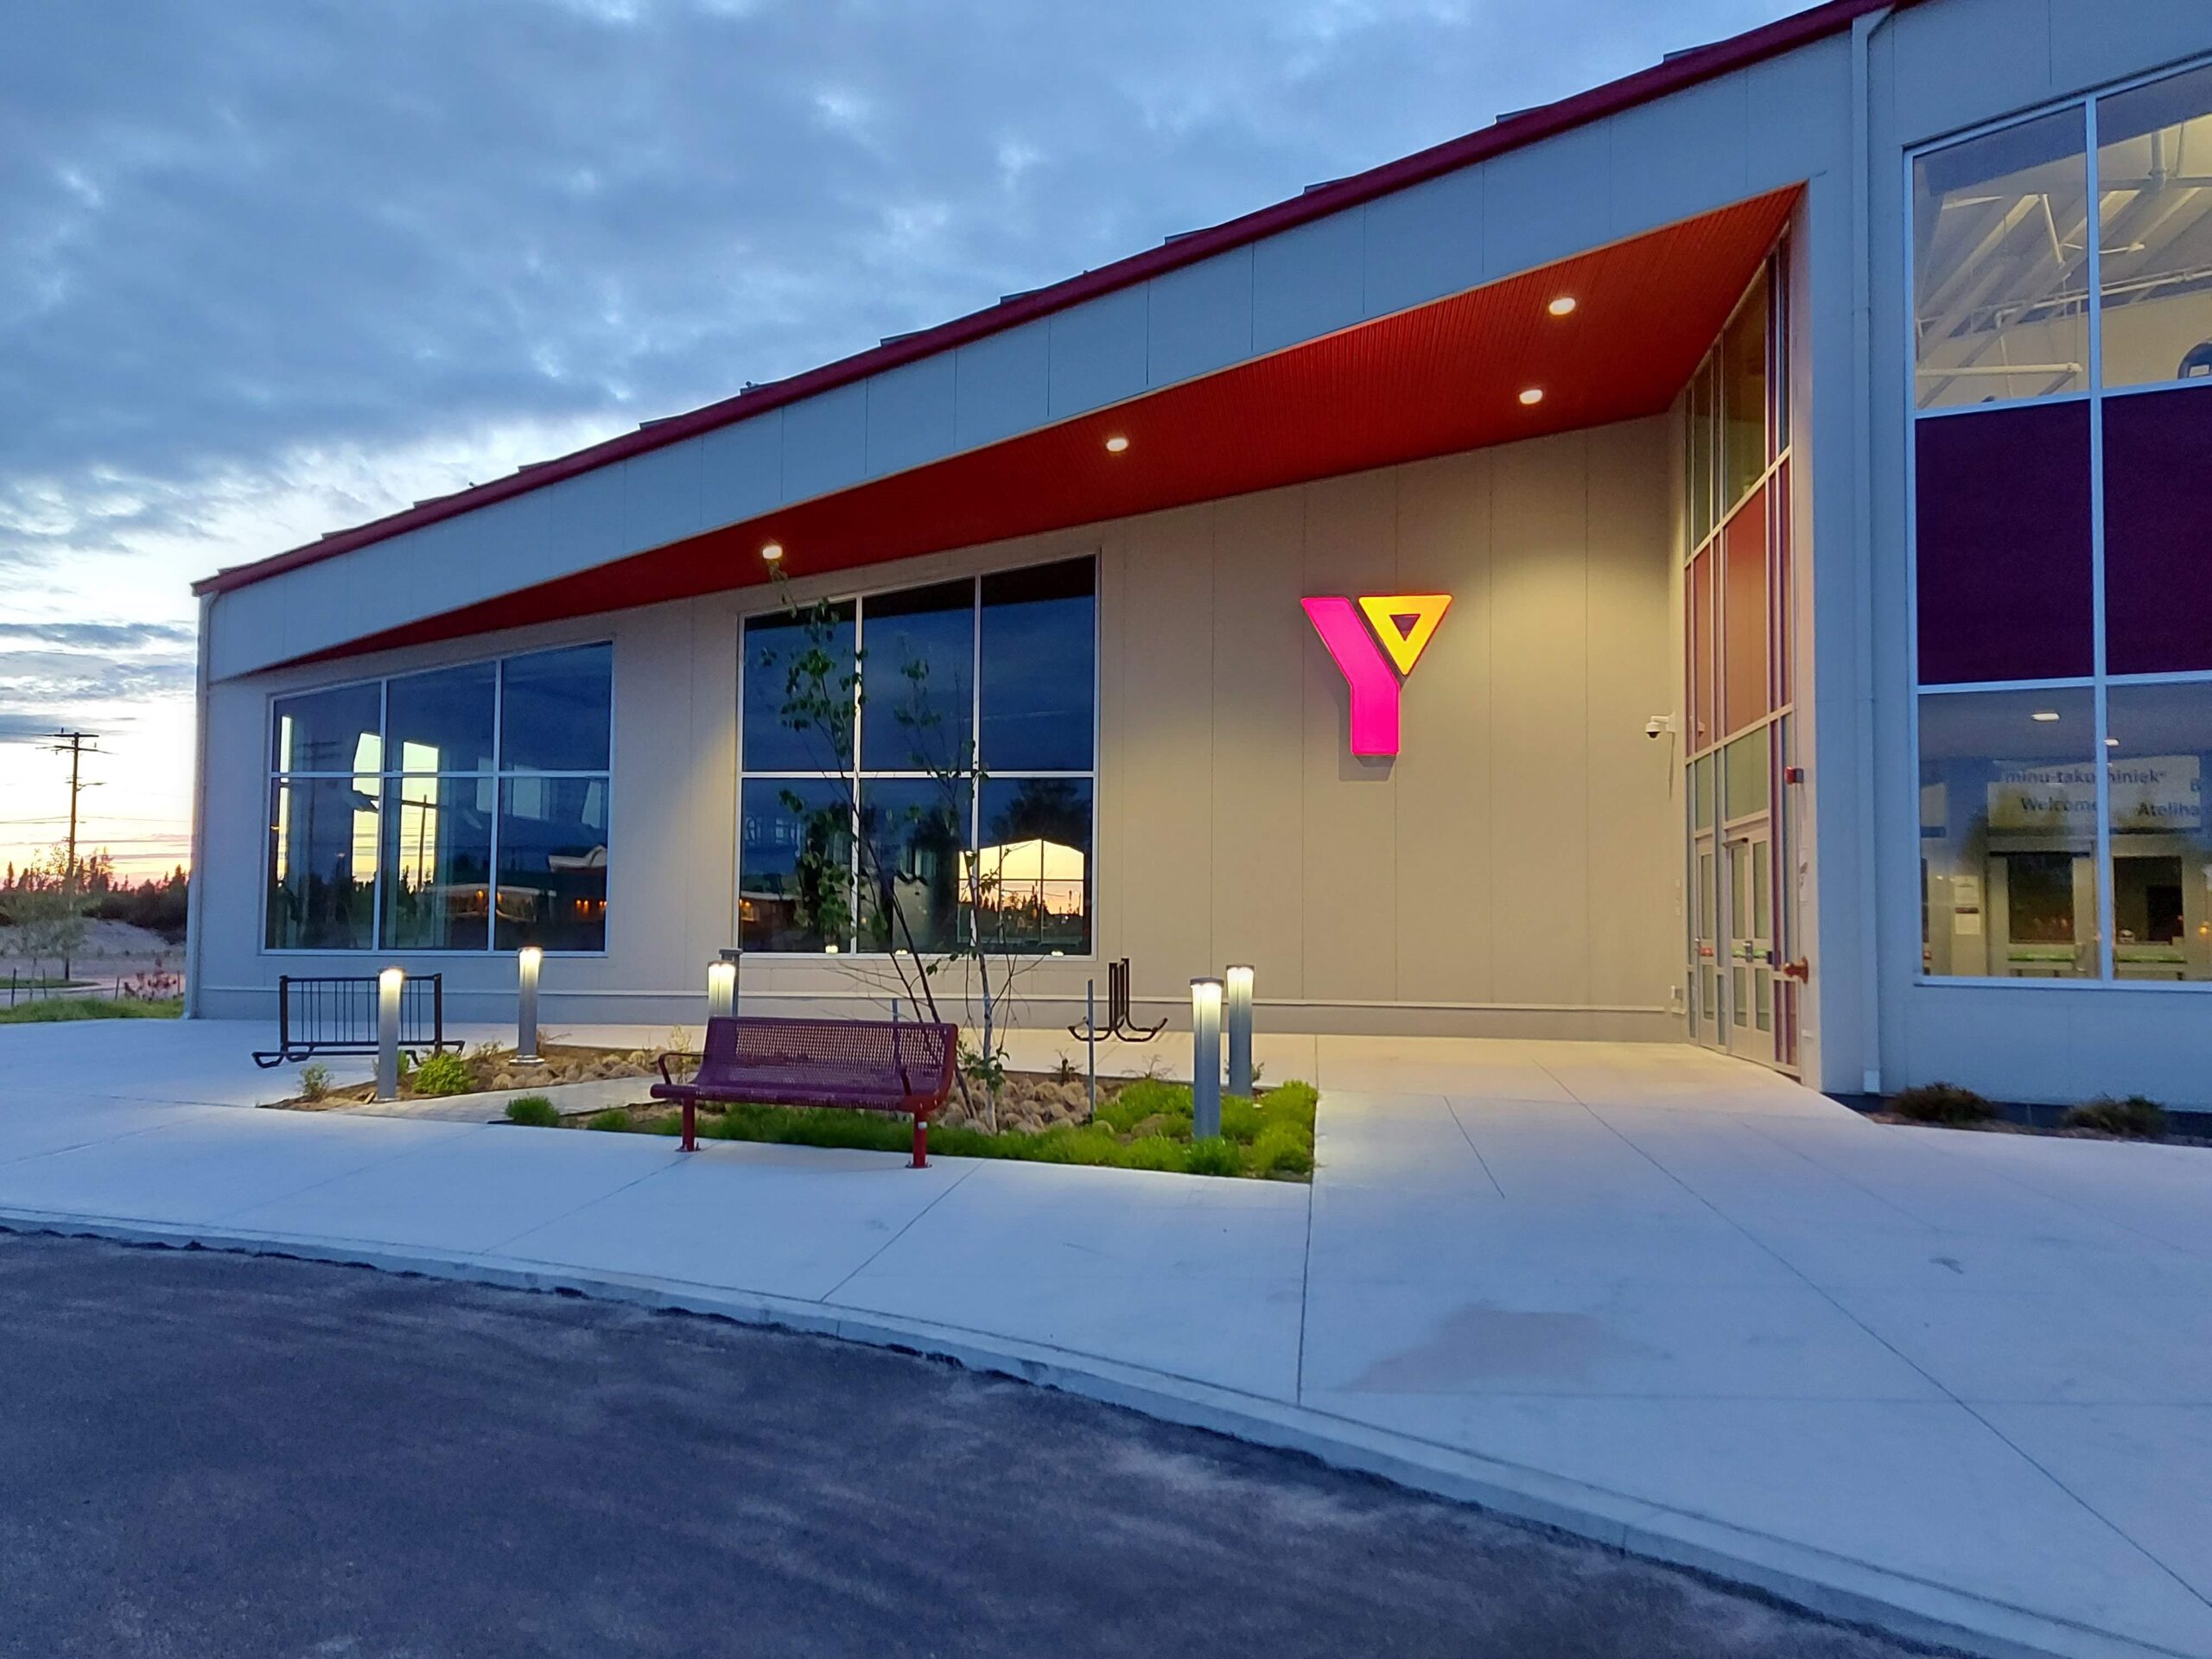 A wide angle view of of the entry way of a YMCA